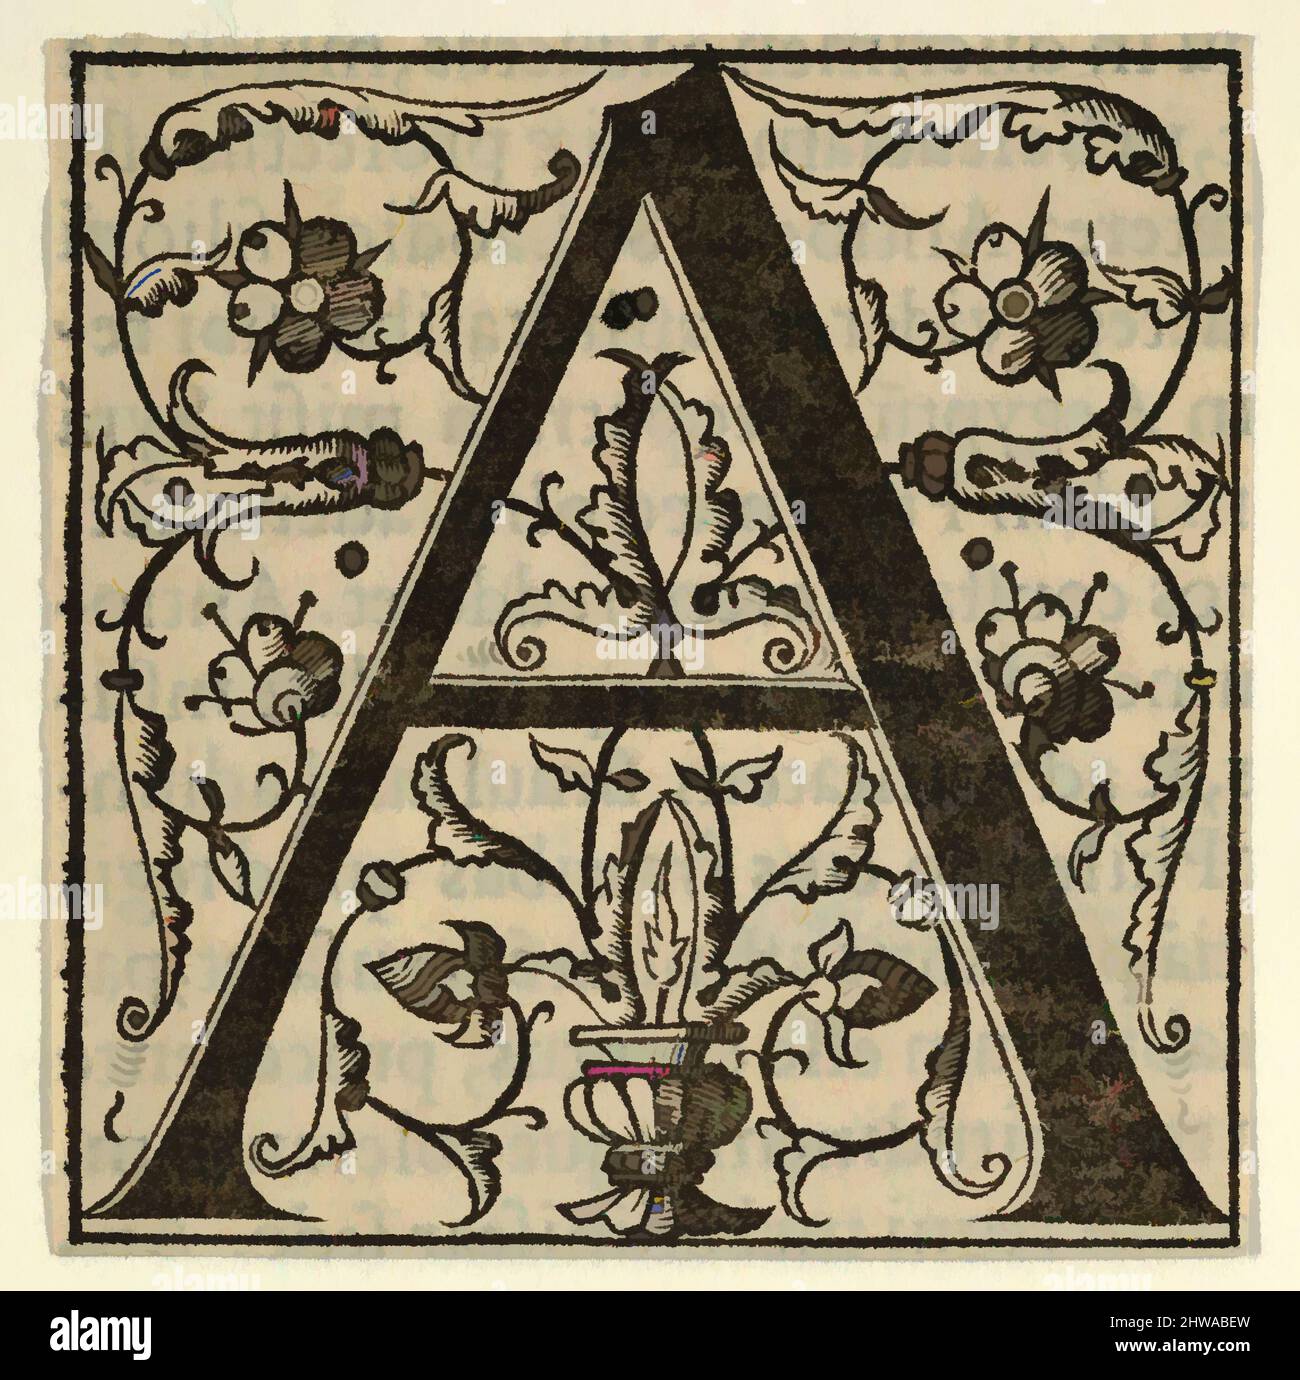 Art inspired by Drawings and Prints, Print, Initial letter A with garlands, Artist, Oronce Finé, French, Briançon 1494–1555 Paris, Finé, Classic works modernized by Artotop with a splash of modernity. Shapes, color and value, eye-catching visual impact on art. Emotions through freedom of artworks in a contemporary way. A timeless message pursuing a wildly creative new direction. Artists turning to the digital medium and creating the Artotop NFT Stock Photo